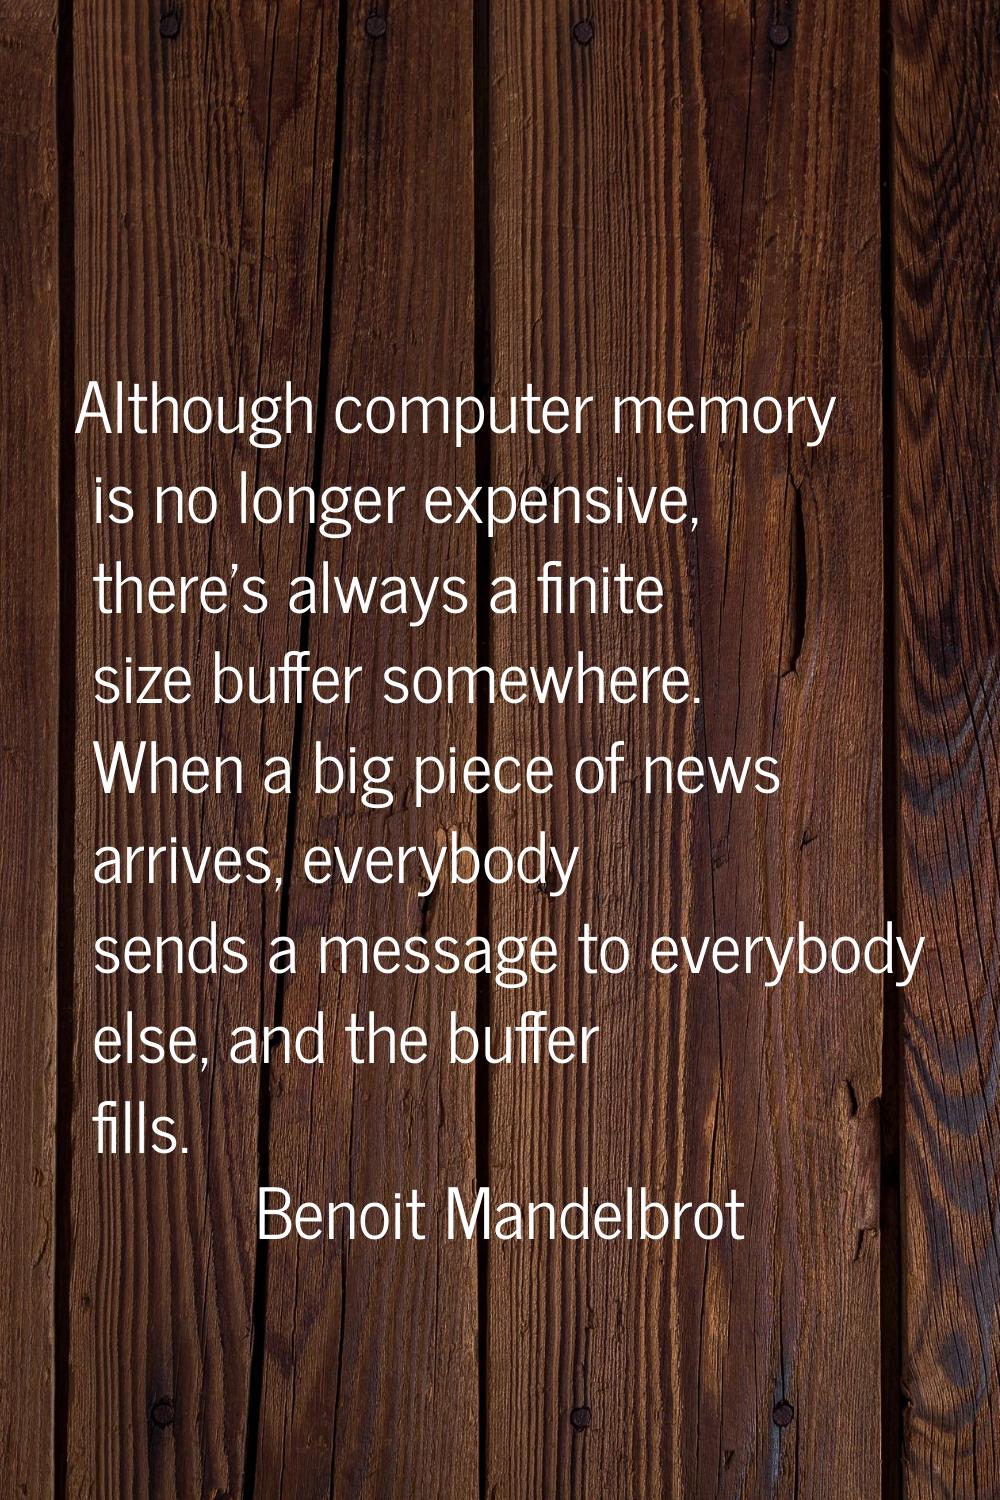 Although computer memory is no longer expensive, there's always a finite size buffer somewhere. Whe